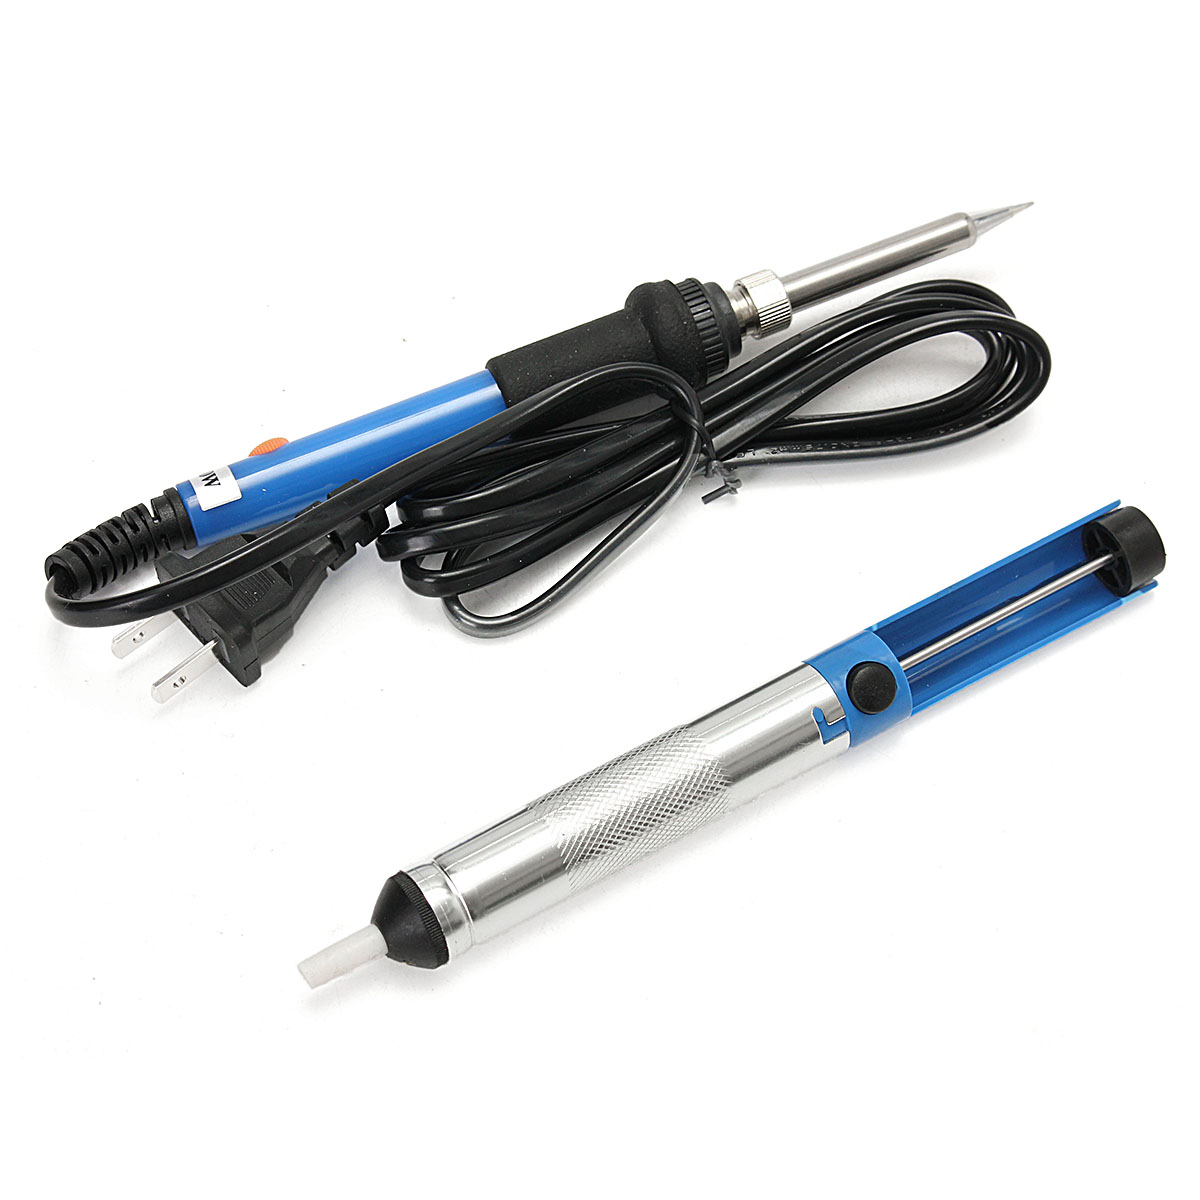 Adjustable-Electric-Temperature-Welding-Soldering-Iron-Tools-Kit-60W-110V-1300320-4